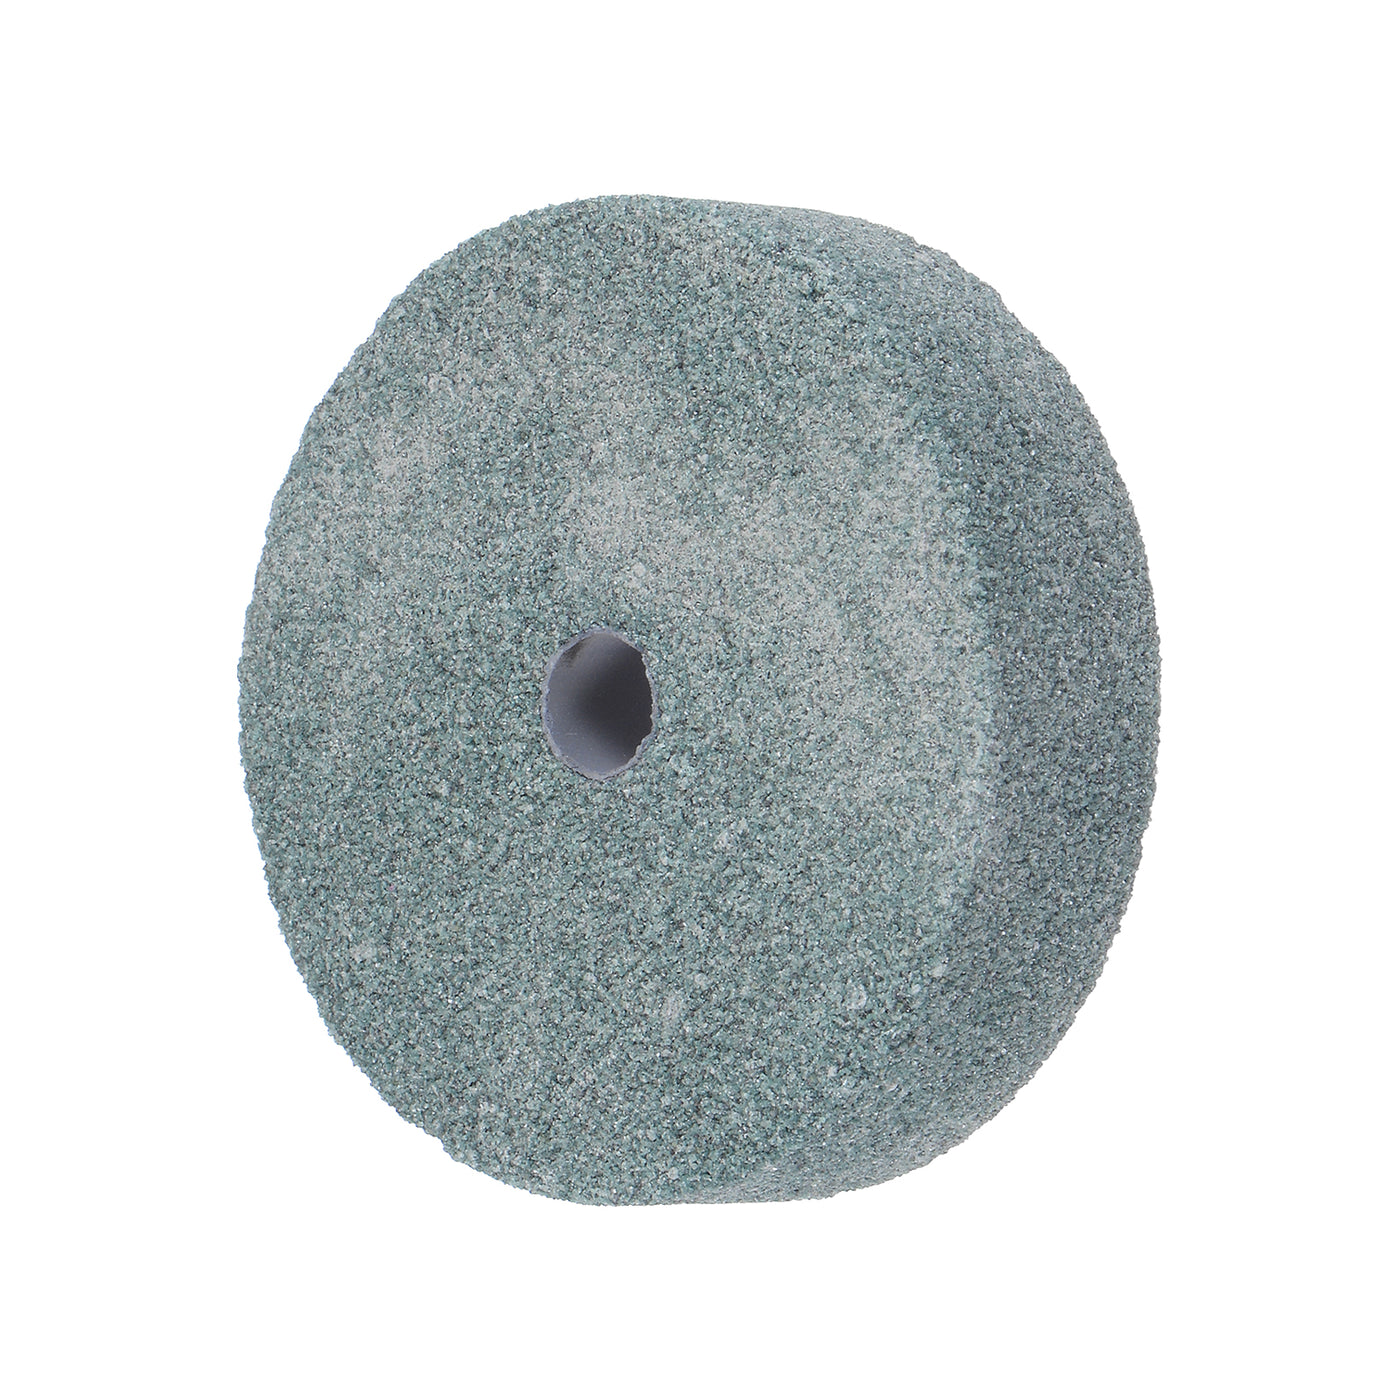 uxcell Uxcell Mounted Grinding Stone 2.9-inch Dia Silicon Chloride Grinding Wheel